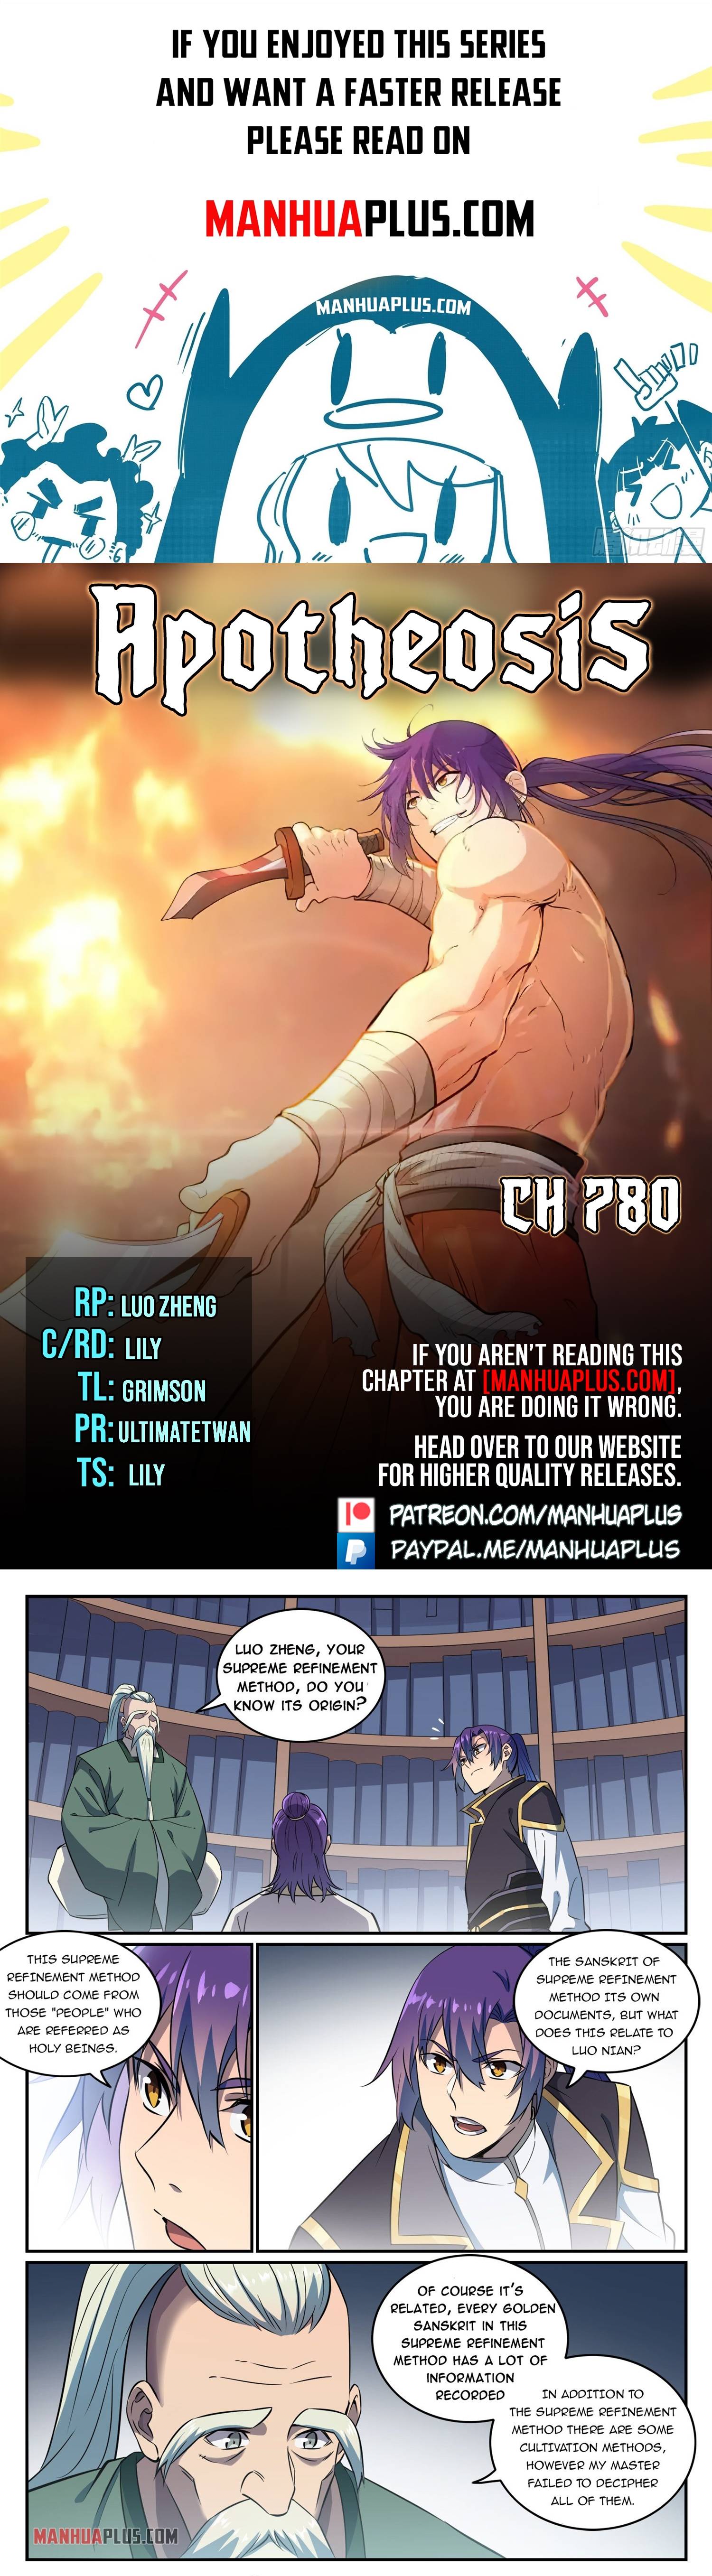 Read One Piece Chapter 1069 - Manganelo